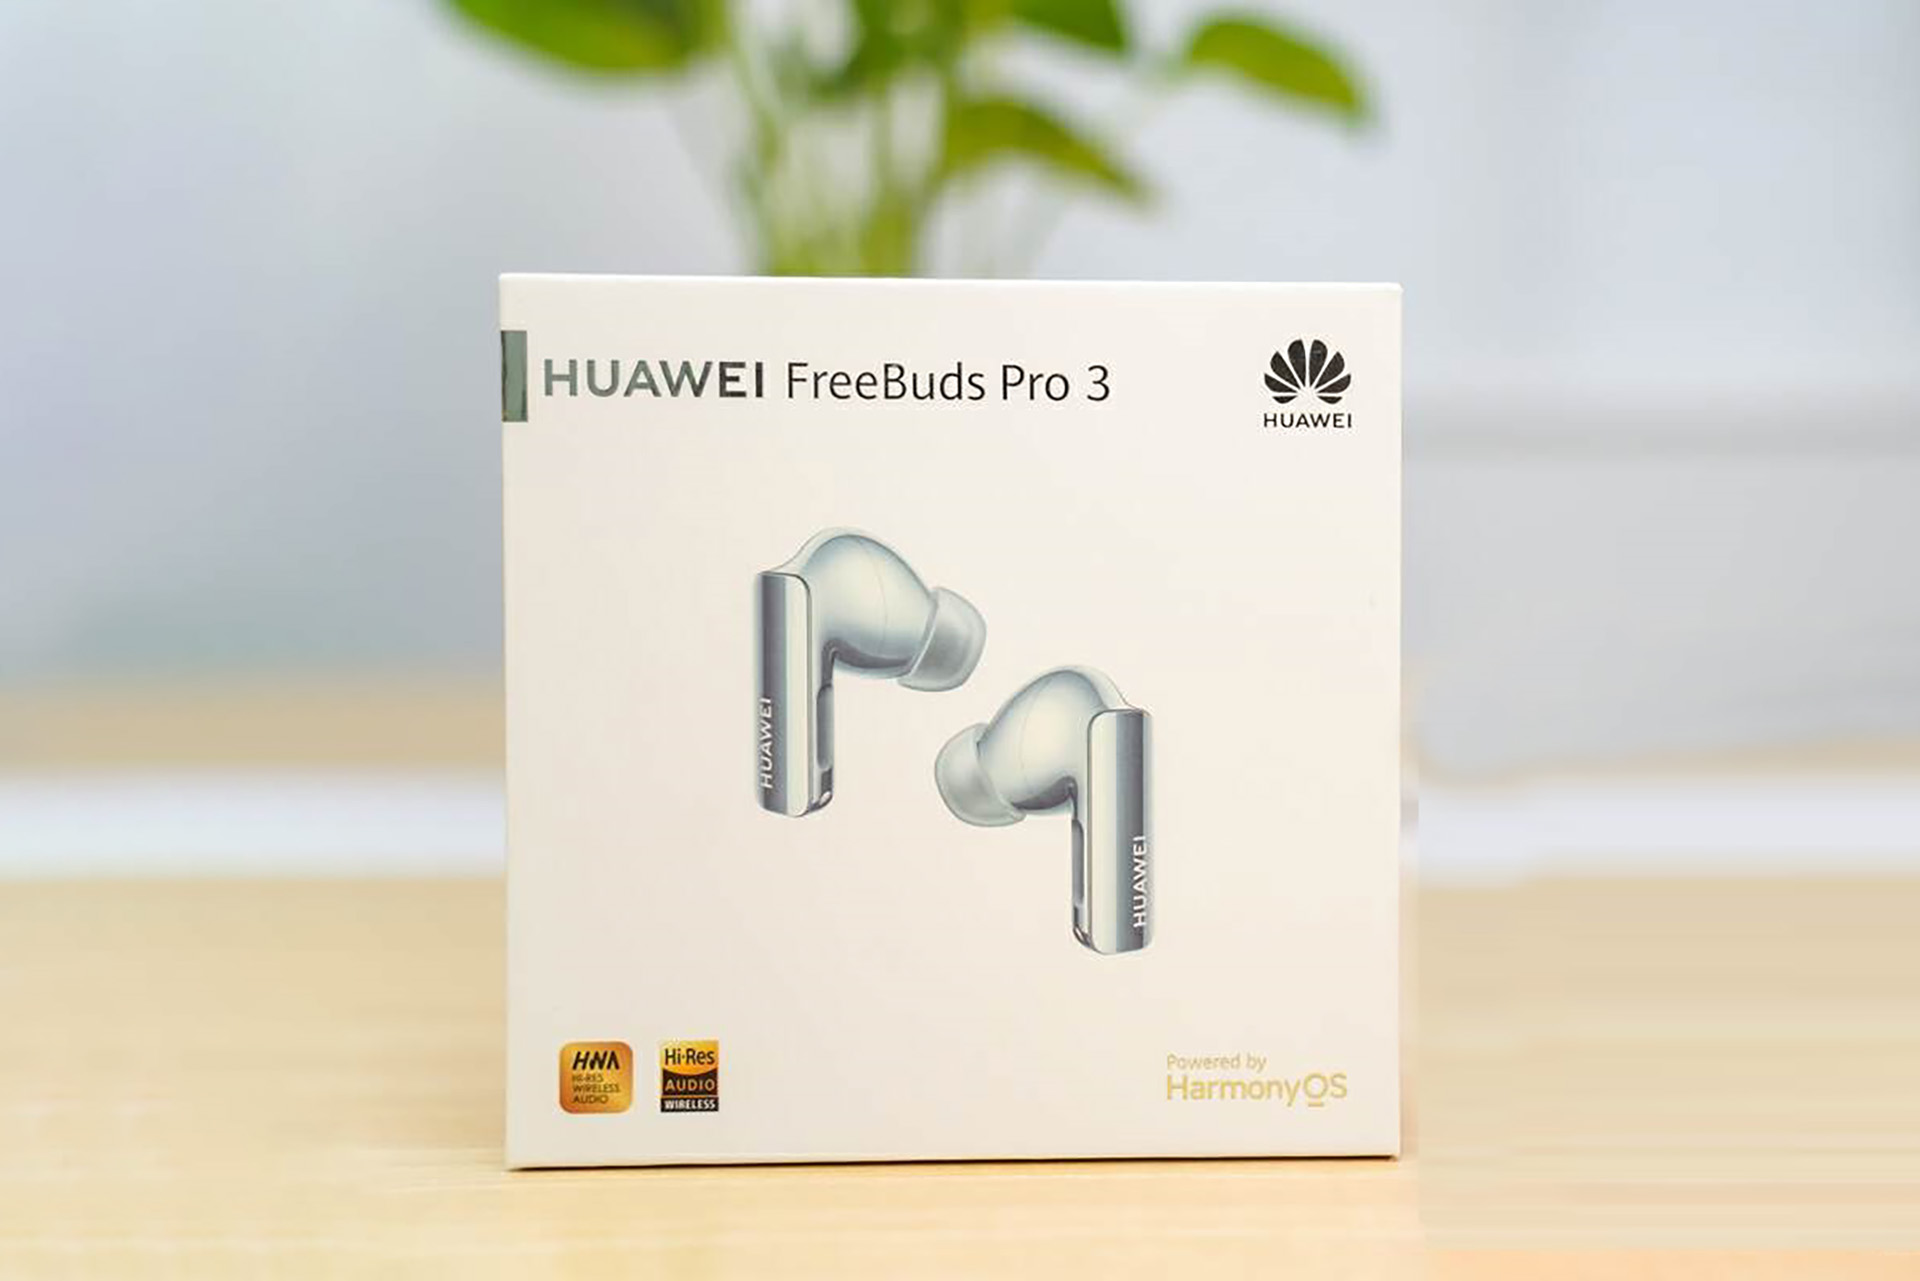 The new Huawei FreeBuds Pro 3 can send audio upto 1.5Mbps with